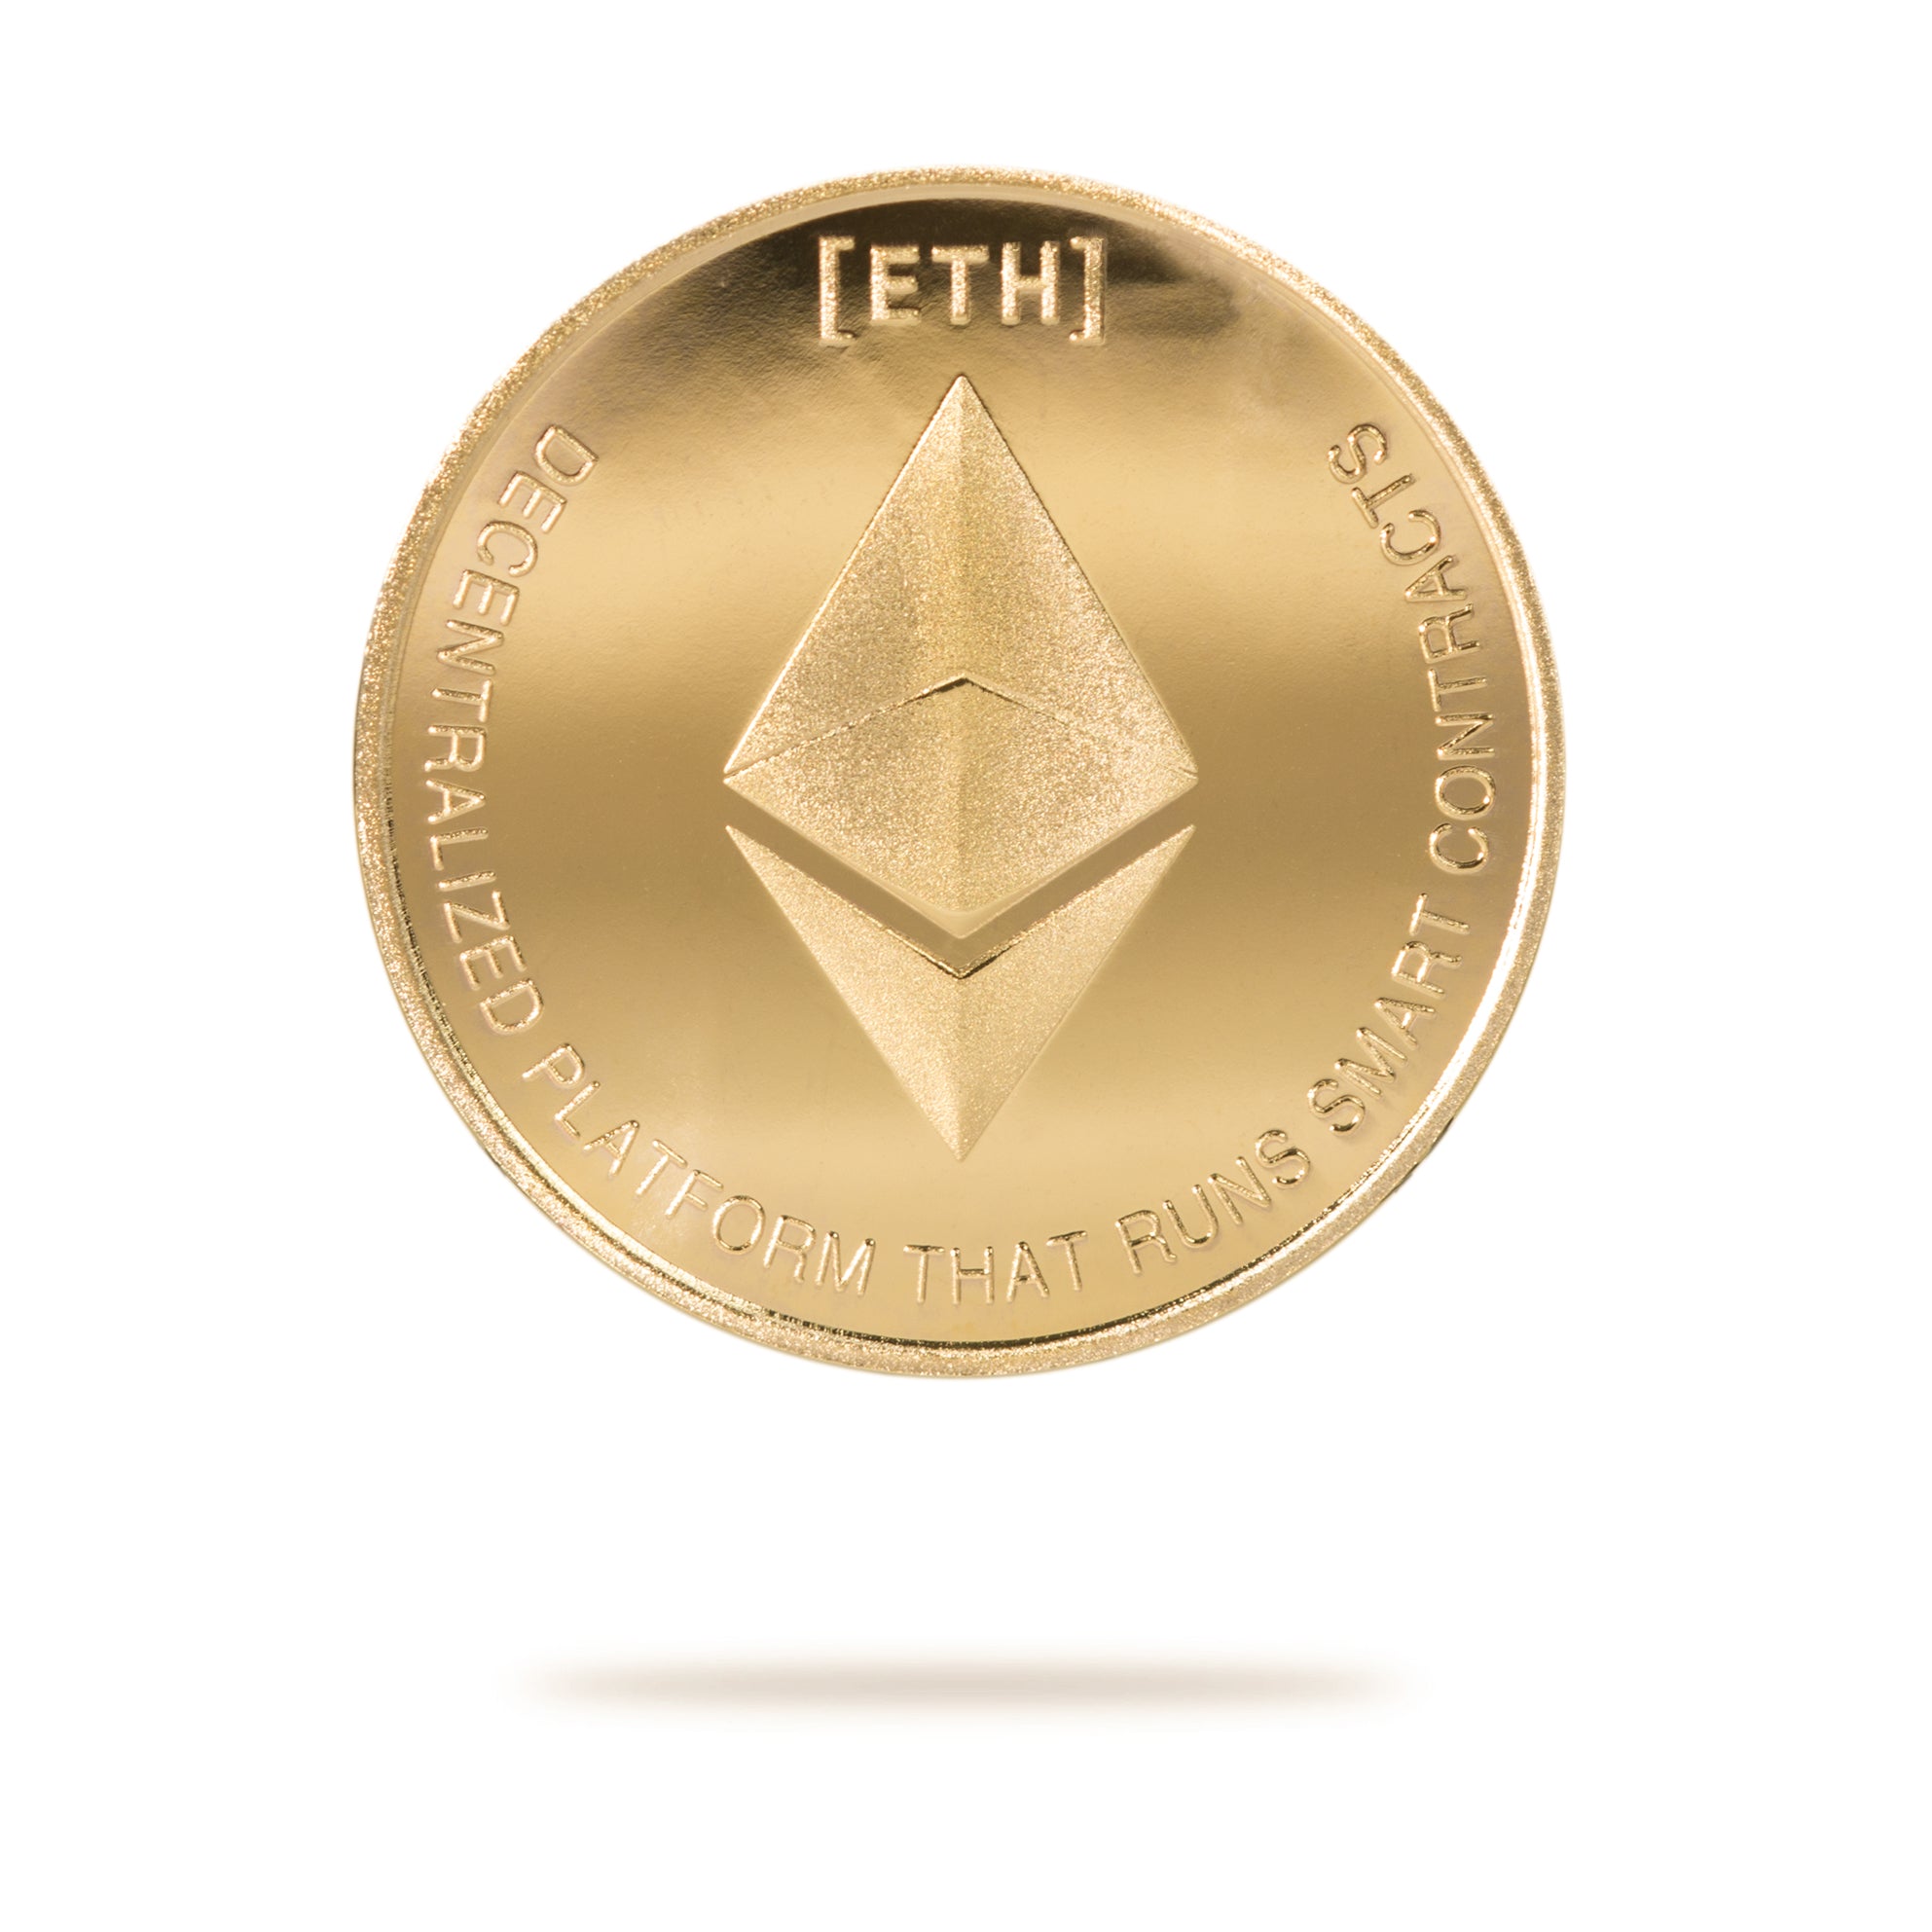 crypto coins using ethereum